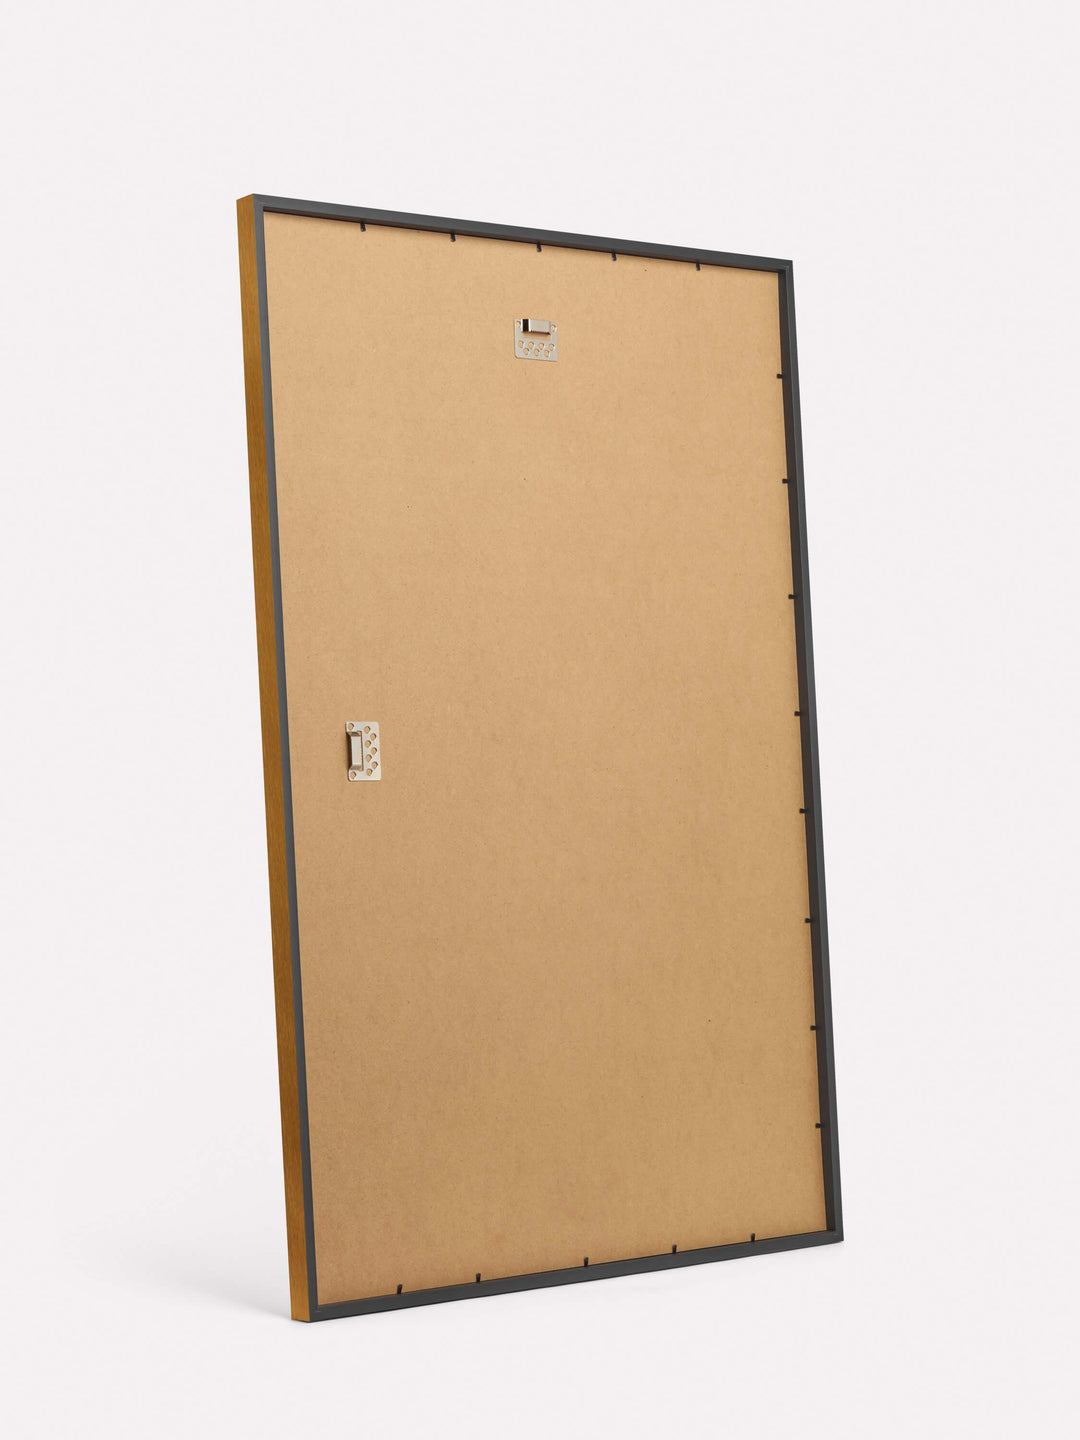 24x36-inch Classic Frame, Gold - Back view